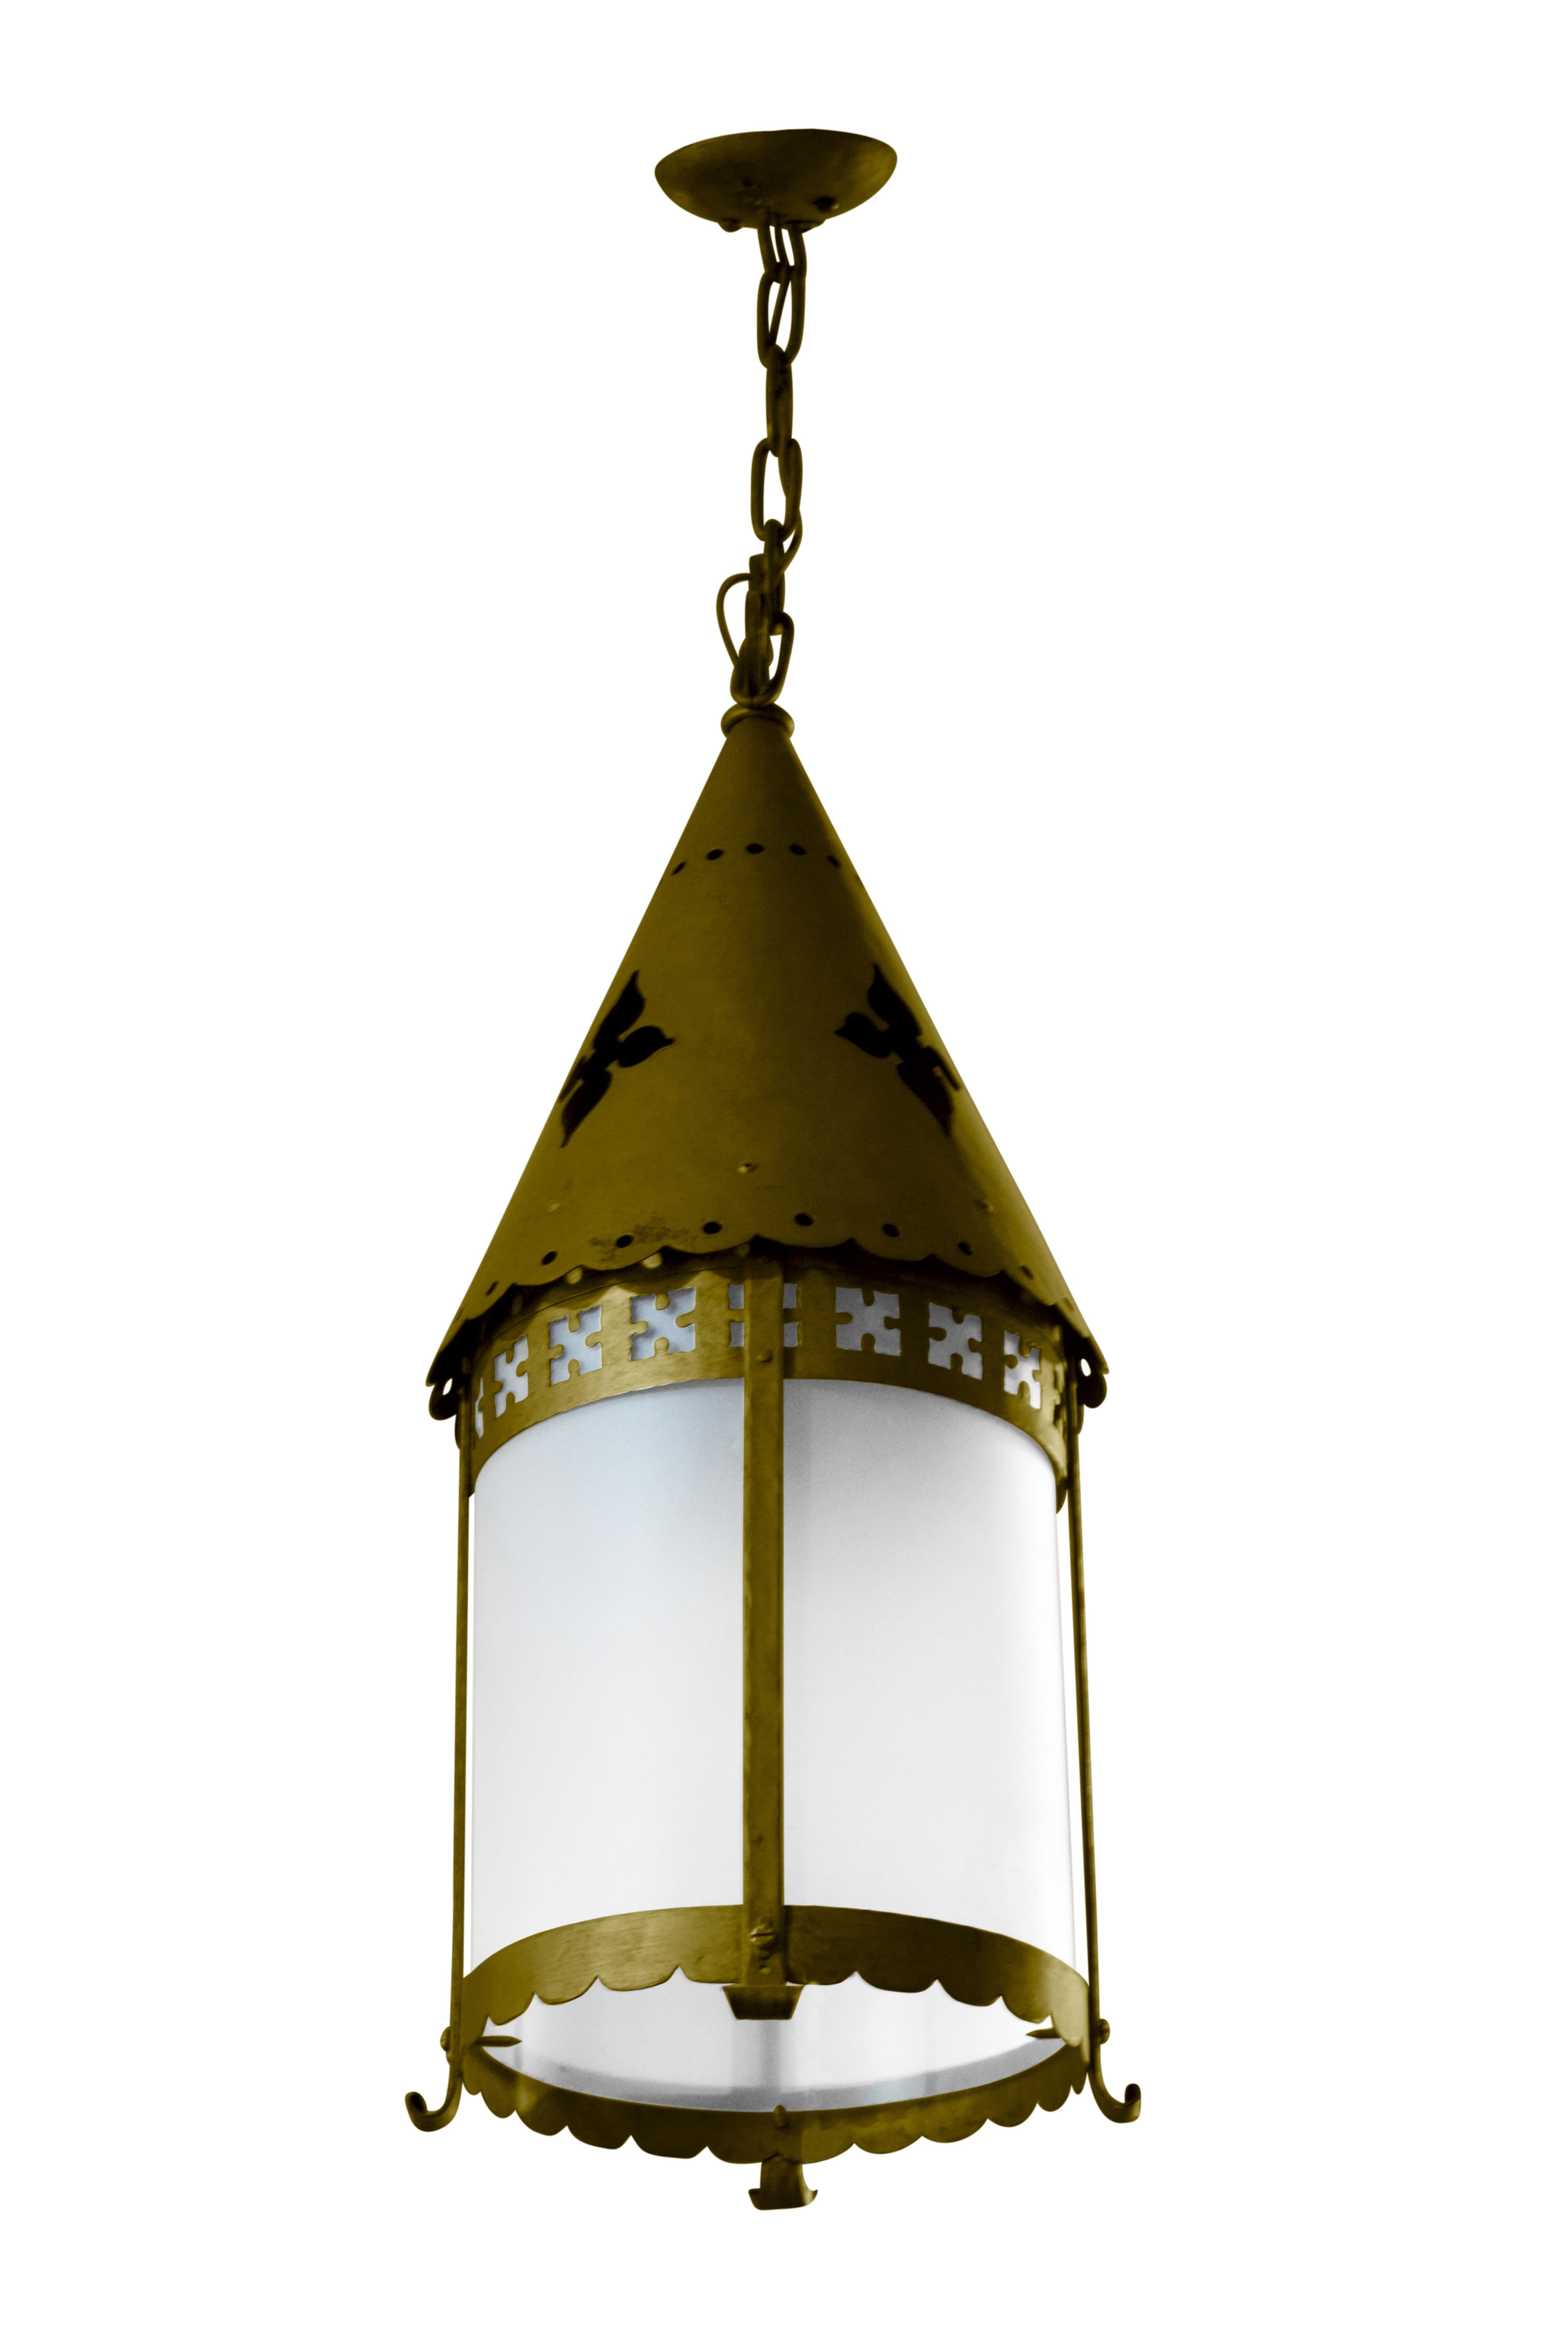 An early 20th century Argentine brass lantern-style pendant light with glass shades.
Requires re-wiring.